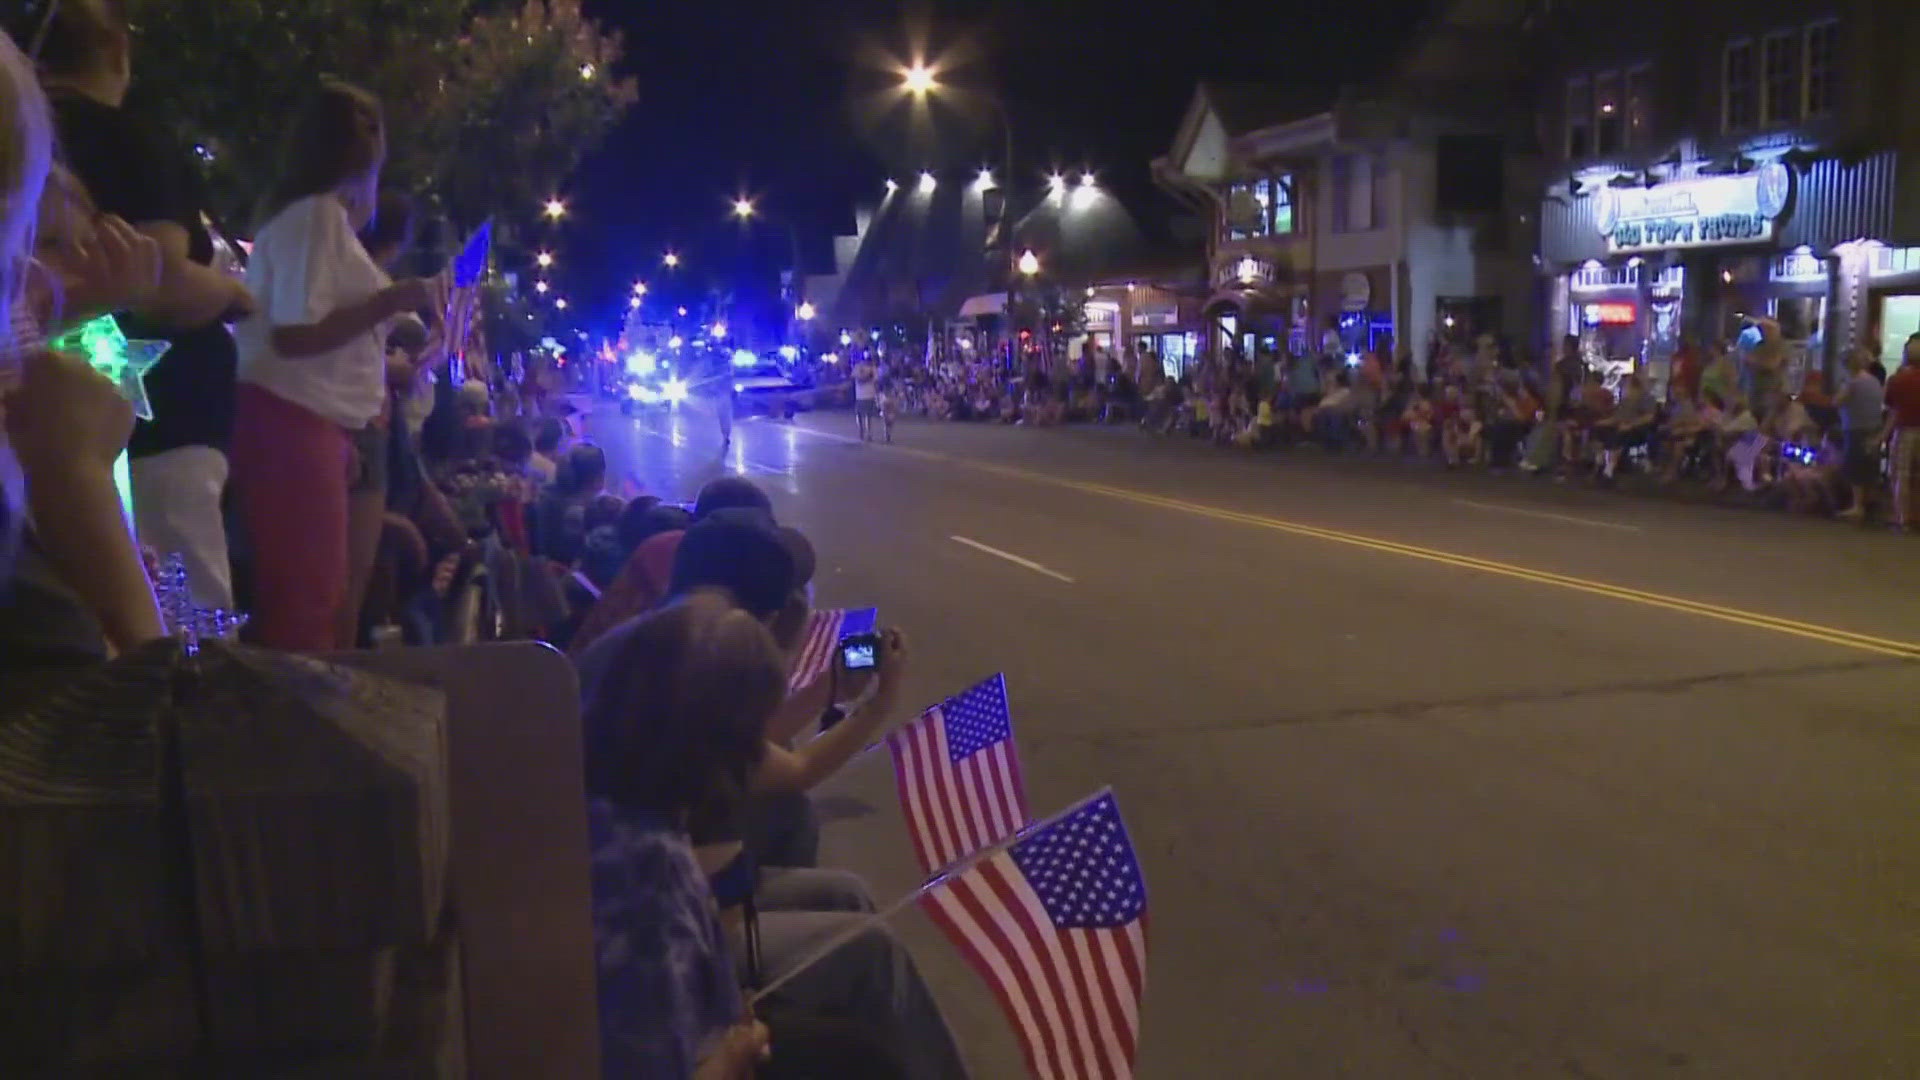 The parade kicks off at exactly midnight on the Fourth of July.